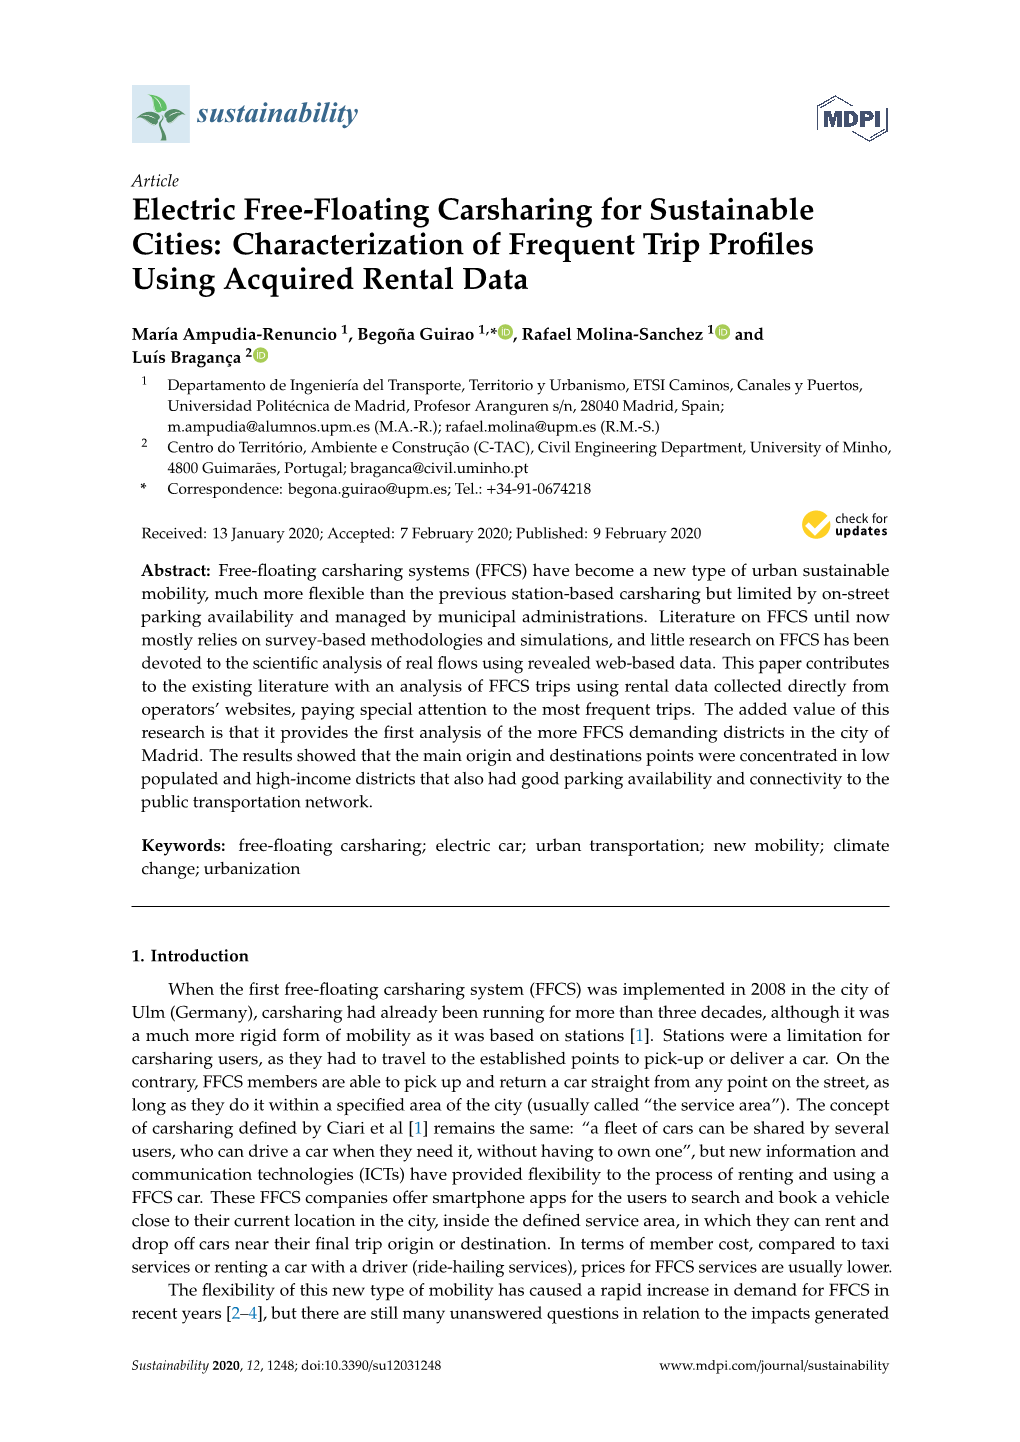 Electric Free-Floating Carsharing for Sustainable Cities: Characterization of Frequent Trip Profiles Using Acquired Rental Data